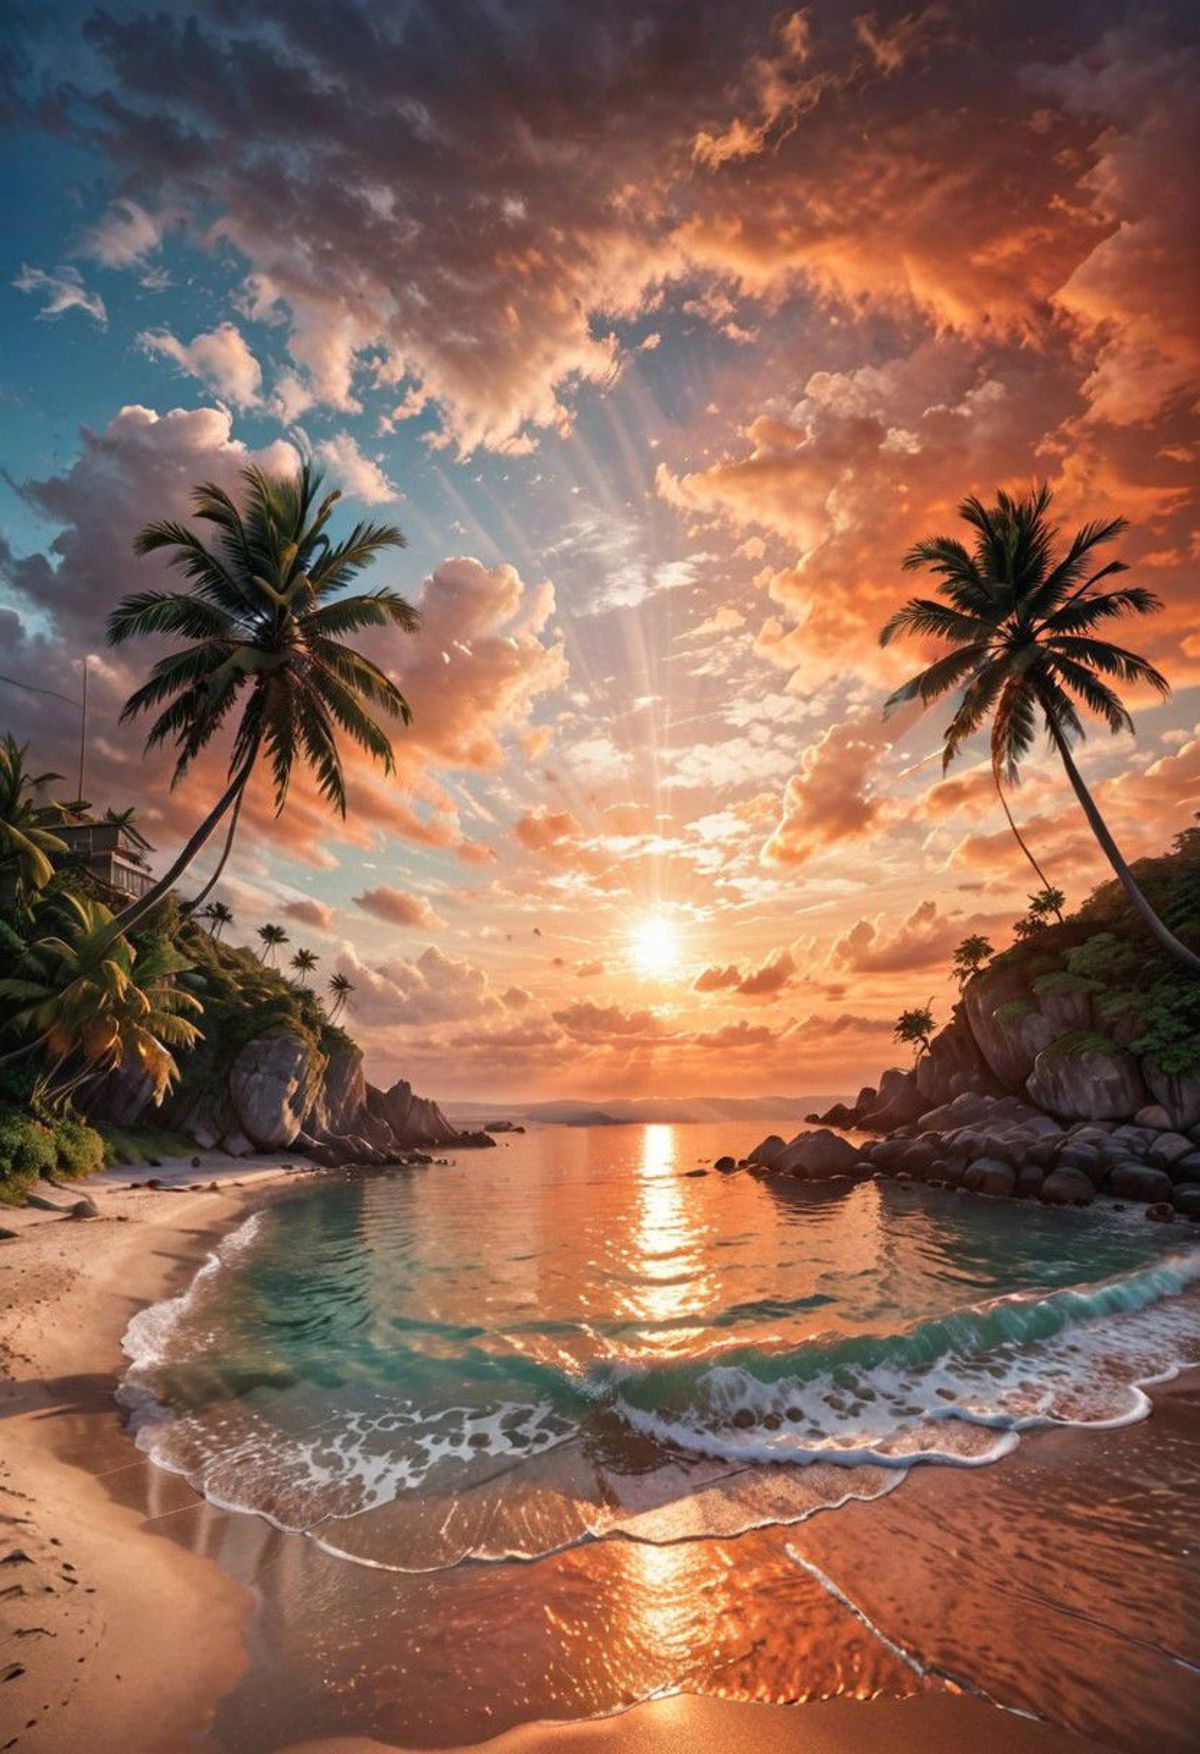 A beautiful sunset over a tropical beach with palm trees and calm water.